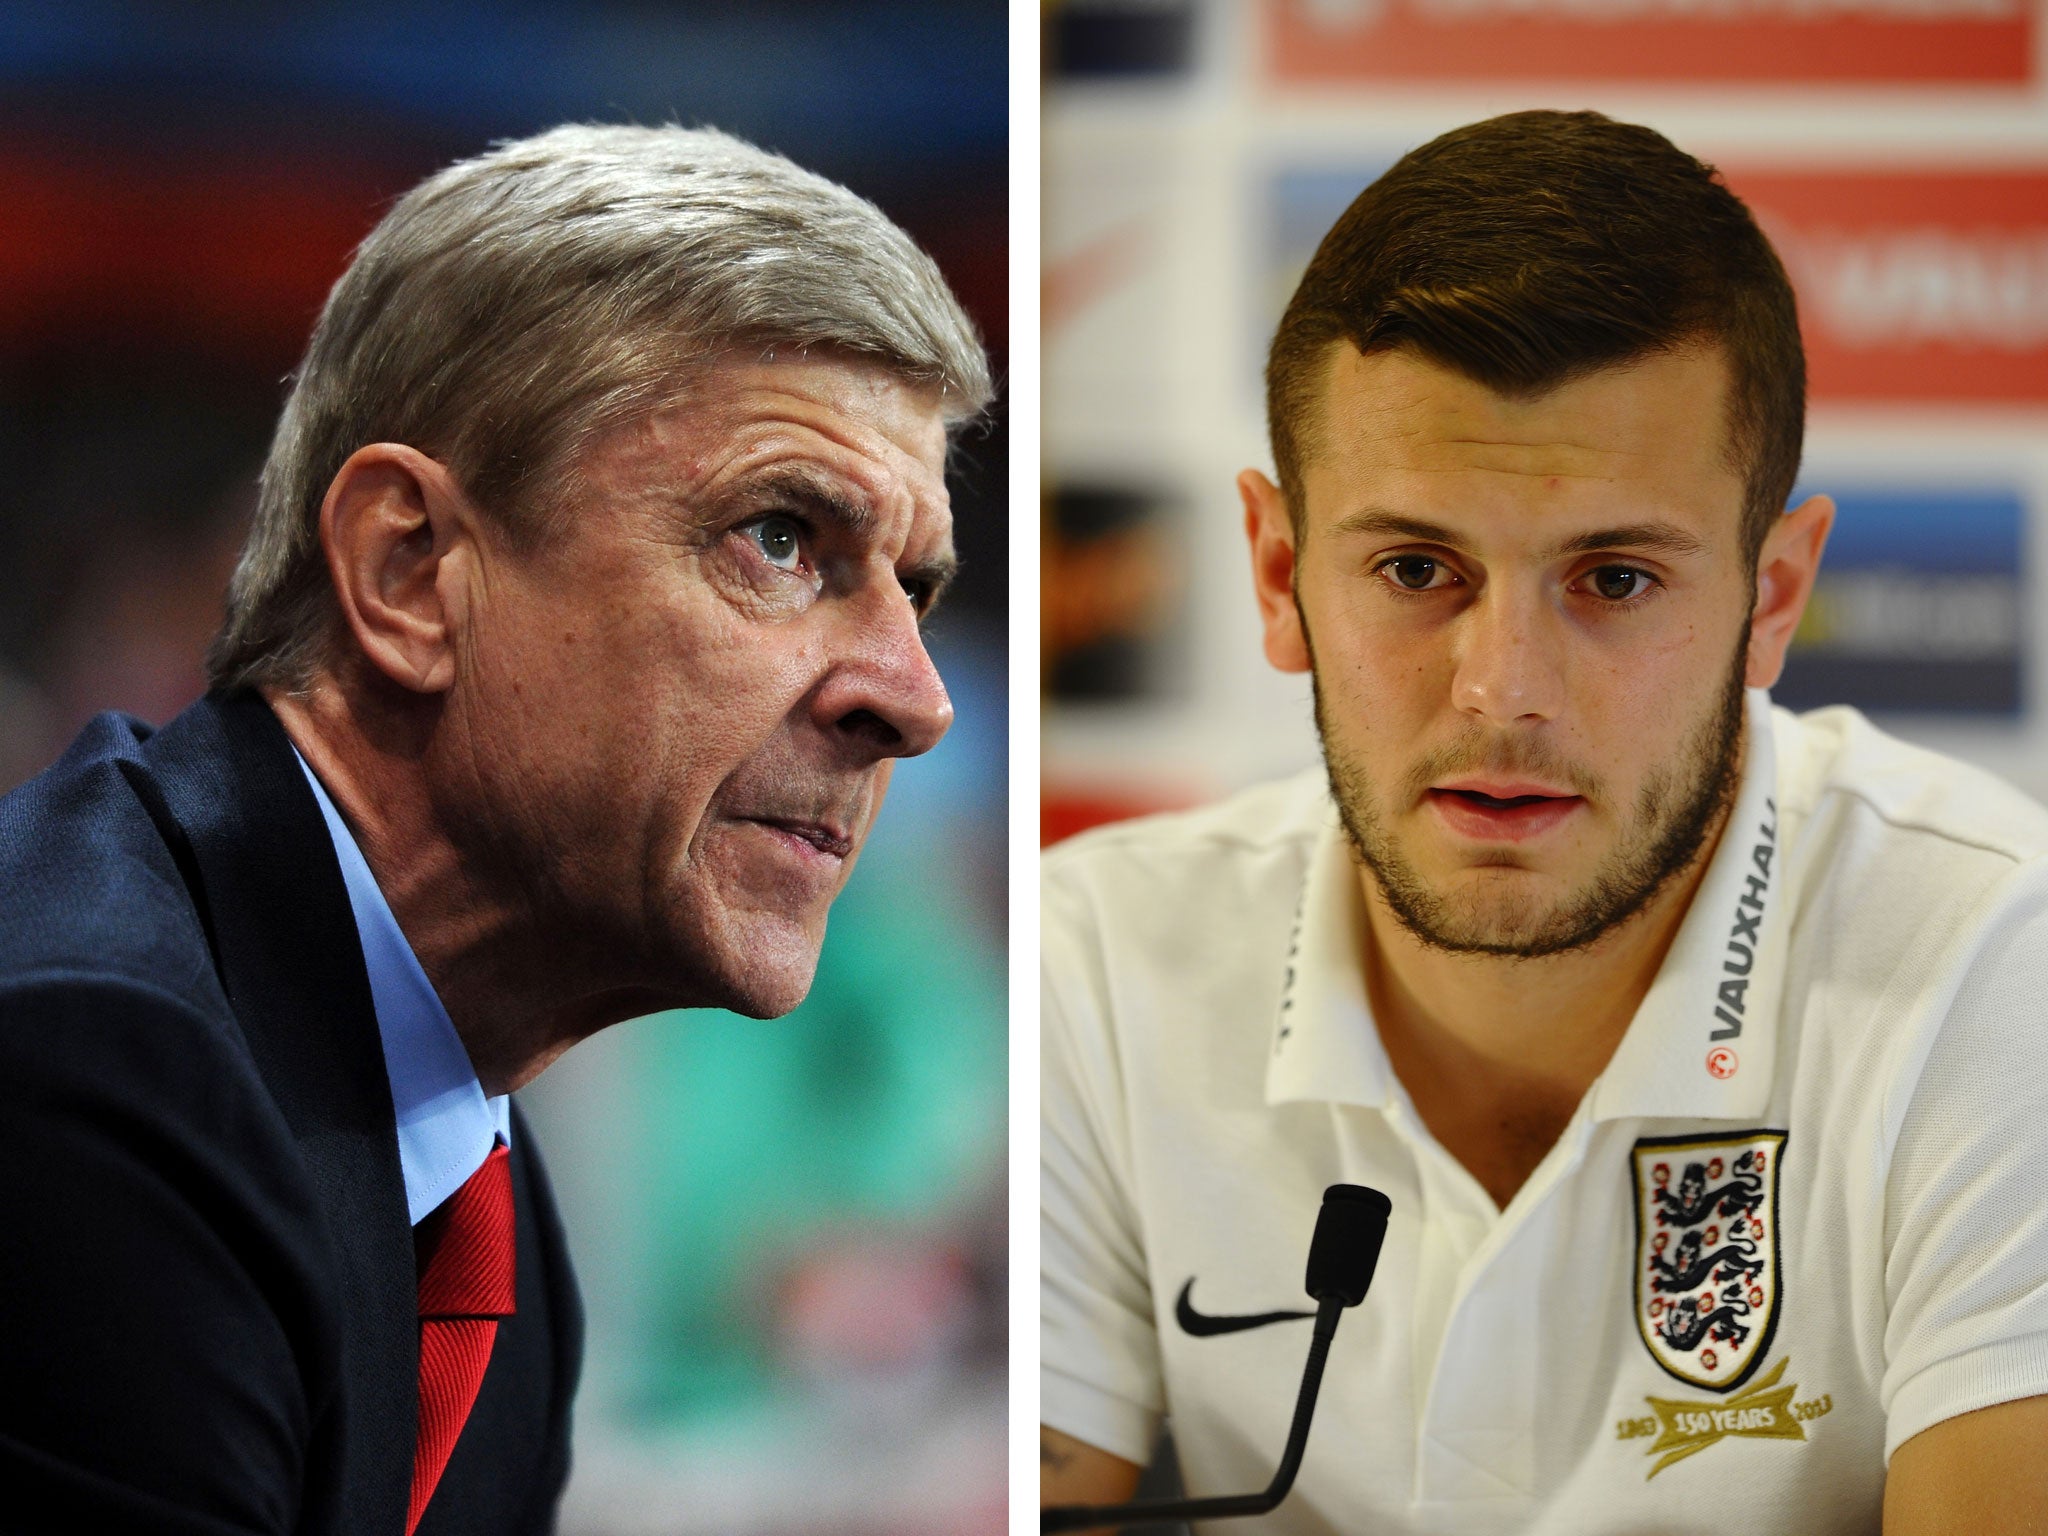 Arsene Wenger has backed Jack Wilshere's comments over players who qualify for England over residency grounds